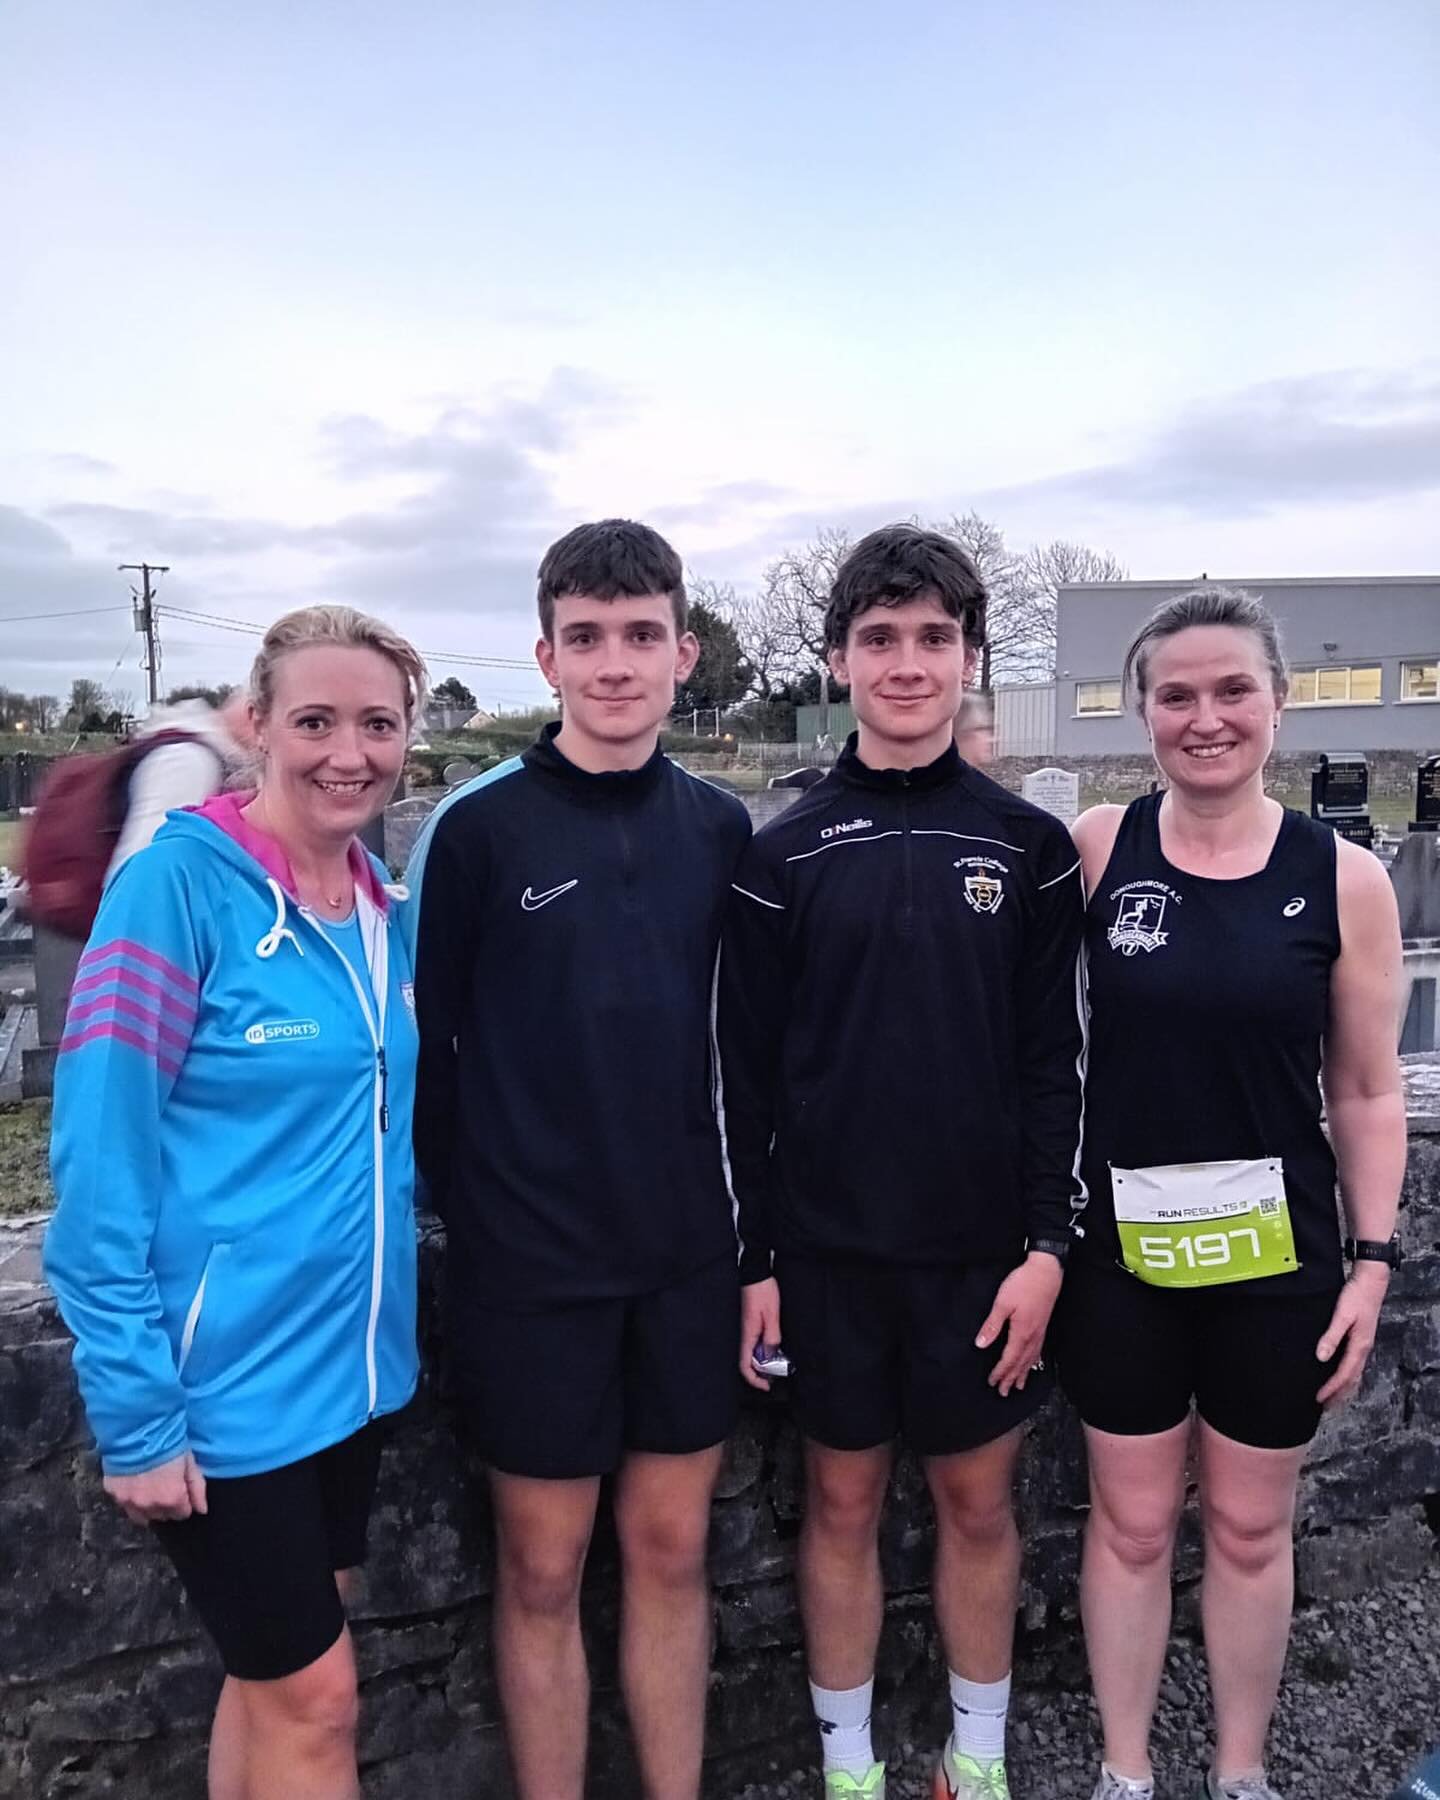 Fair play to Ms Lavelle, Ms Foley, Brian Hawkins and Peter Hawkins for taking part in the Ballintotis 4 Mile Run this evening! 1300 people took part 👏 🏃 It is great to see teachers and students making the most of this dry weather!